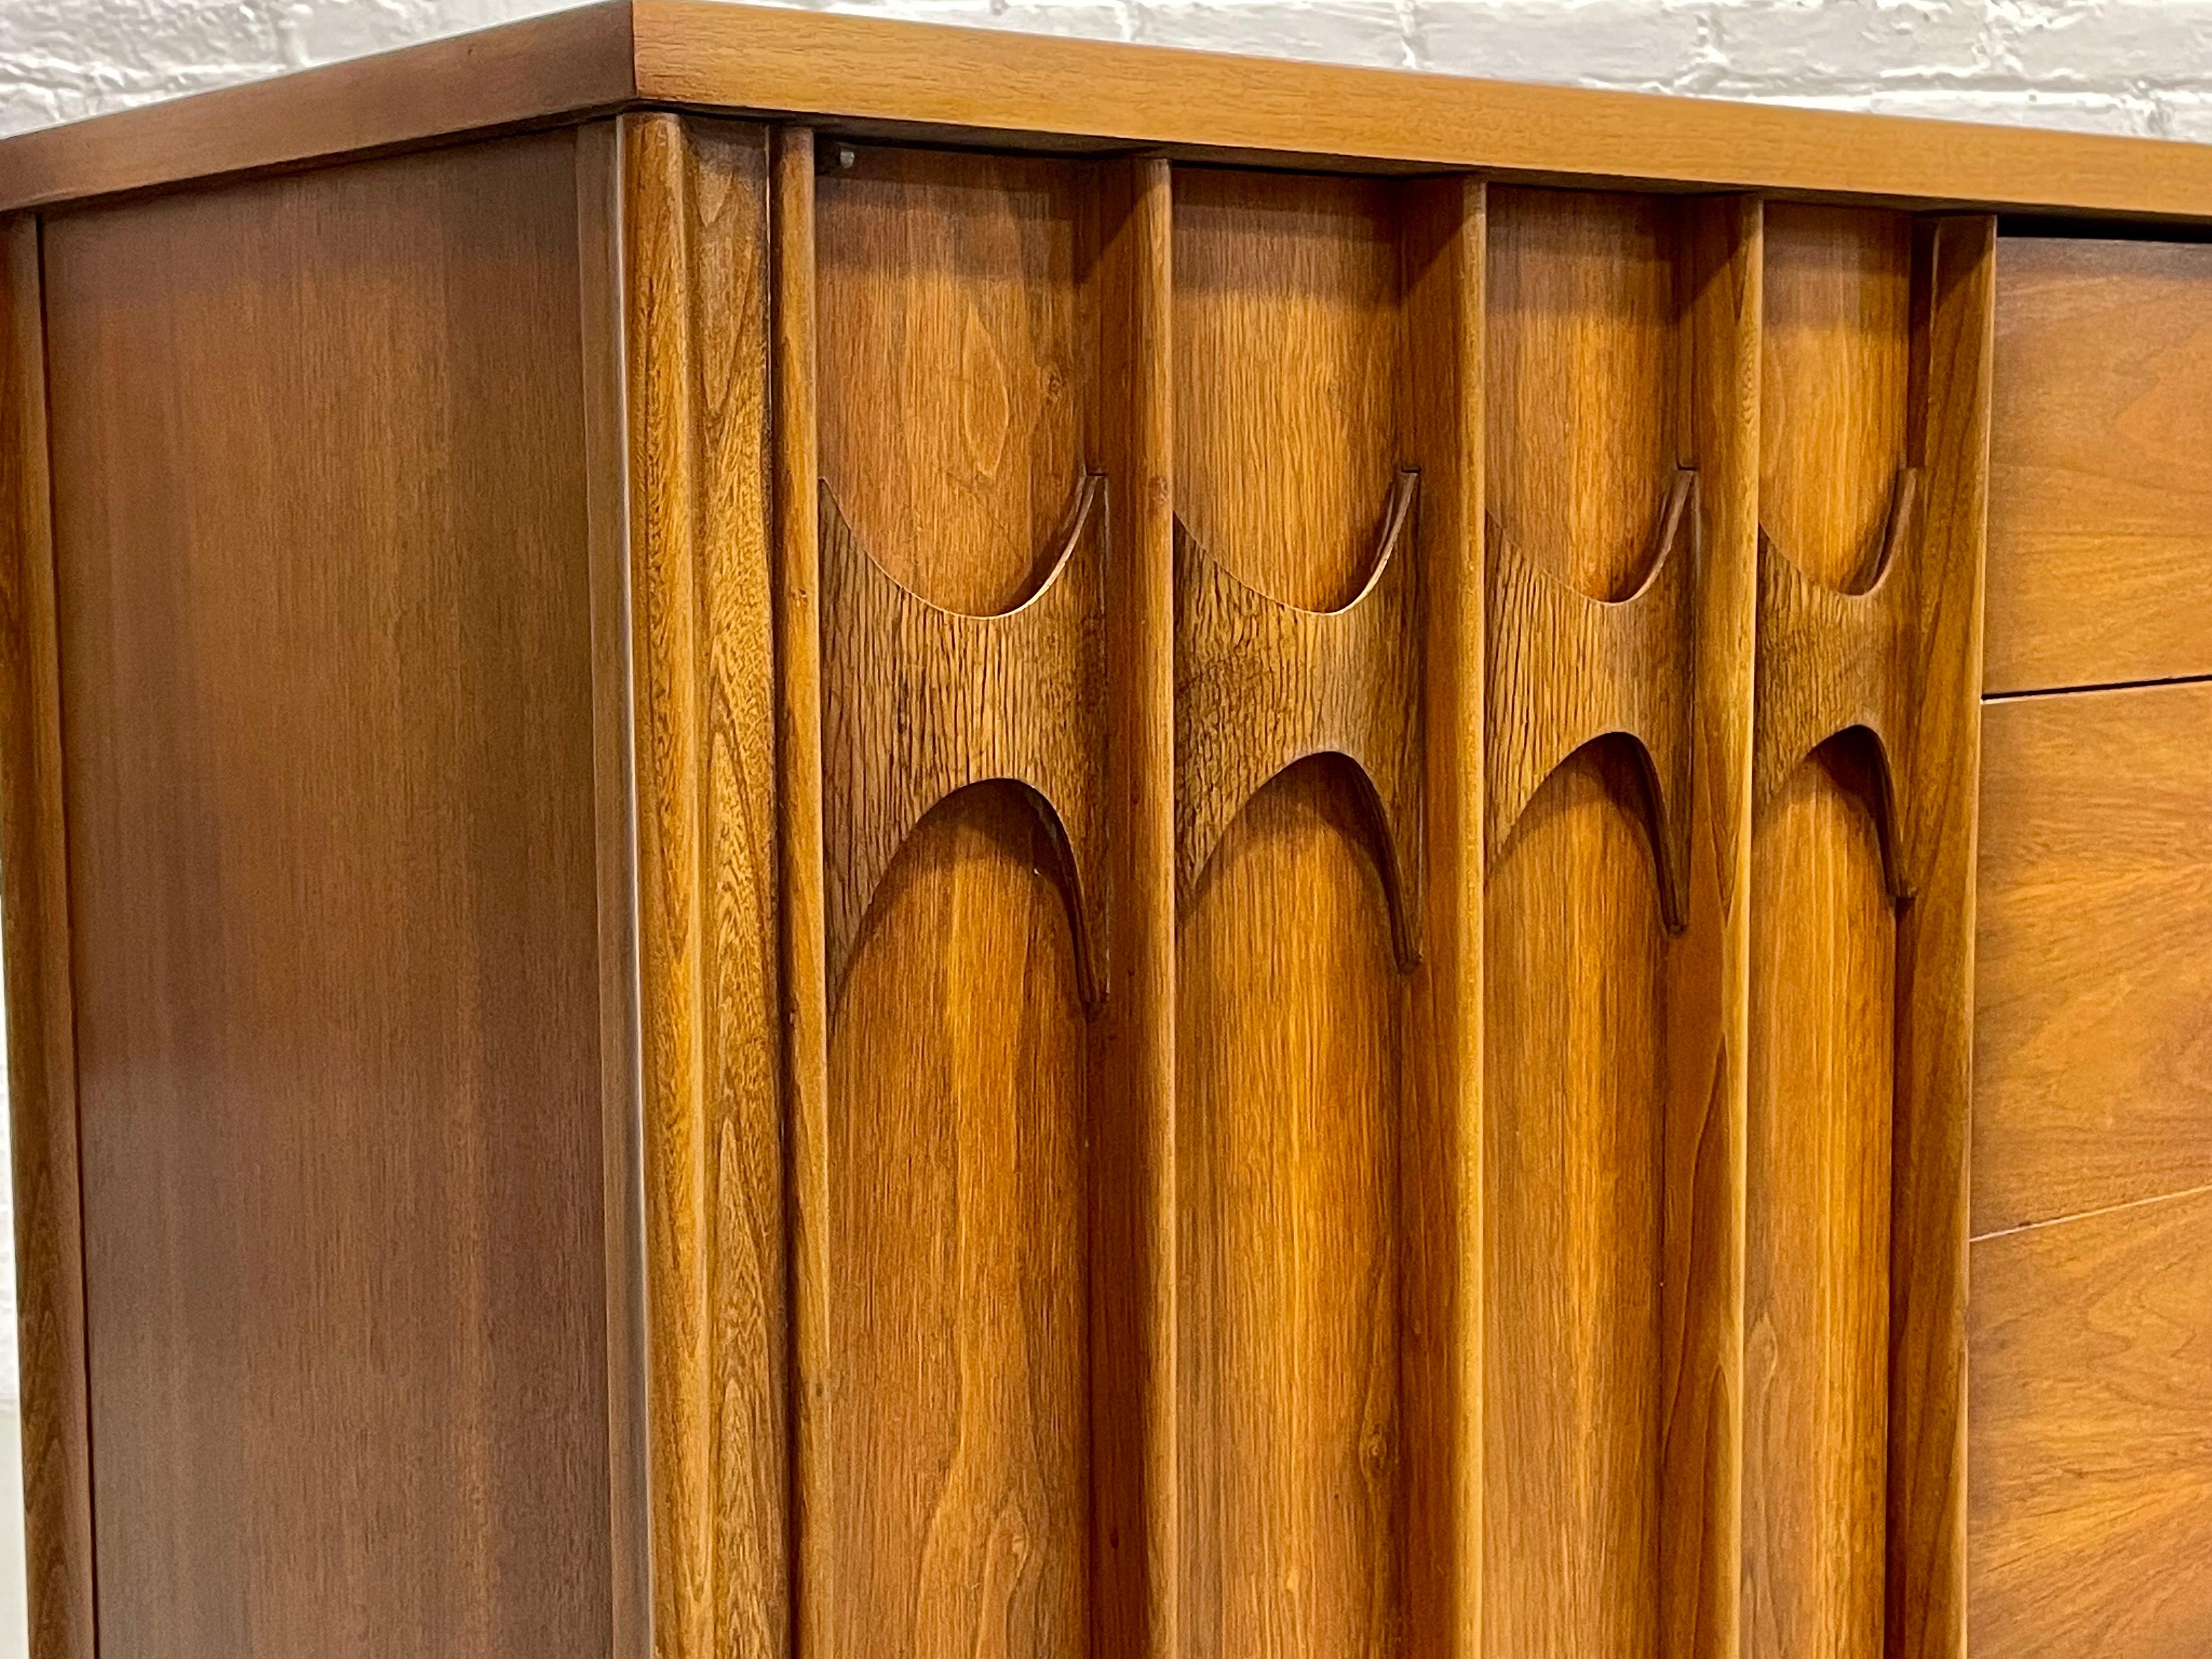 SCULPTED Mid Century MODERN CREDENZA / Long Dresser by Kent Coffey Perspecta, c. 3